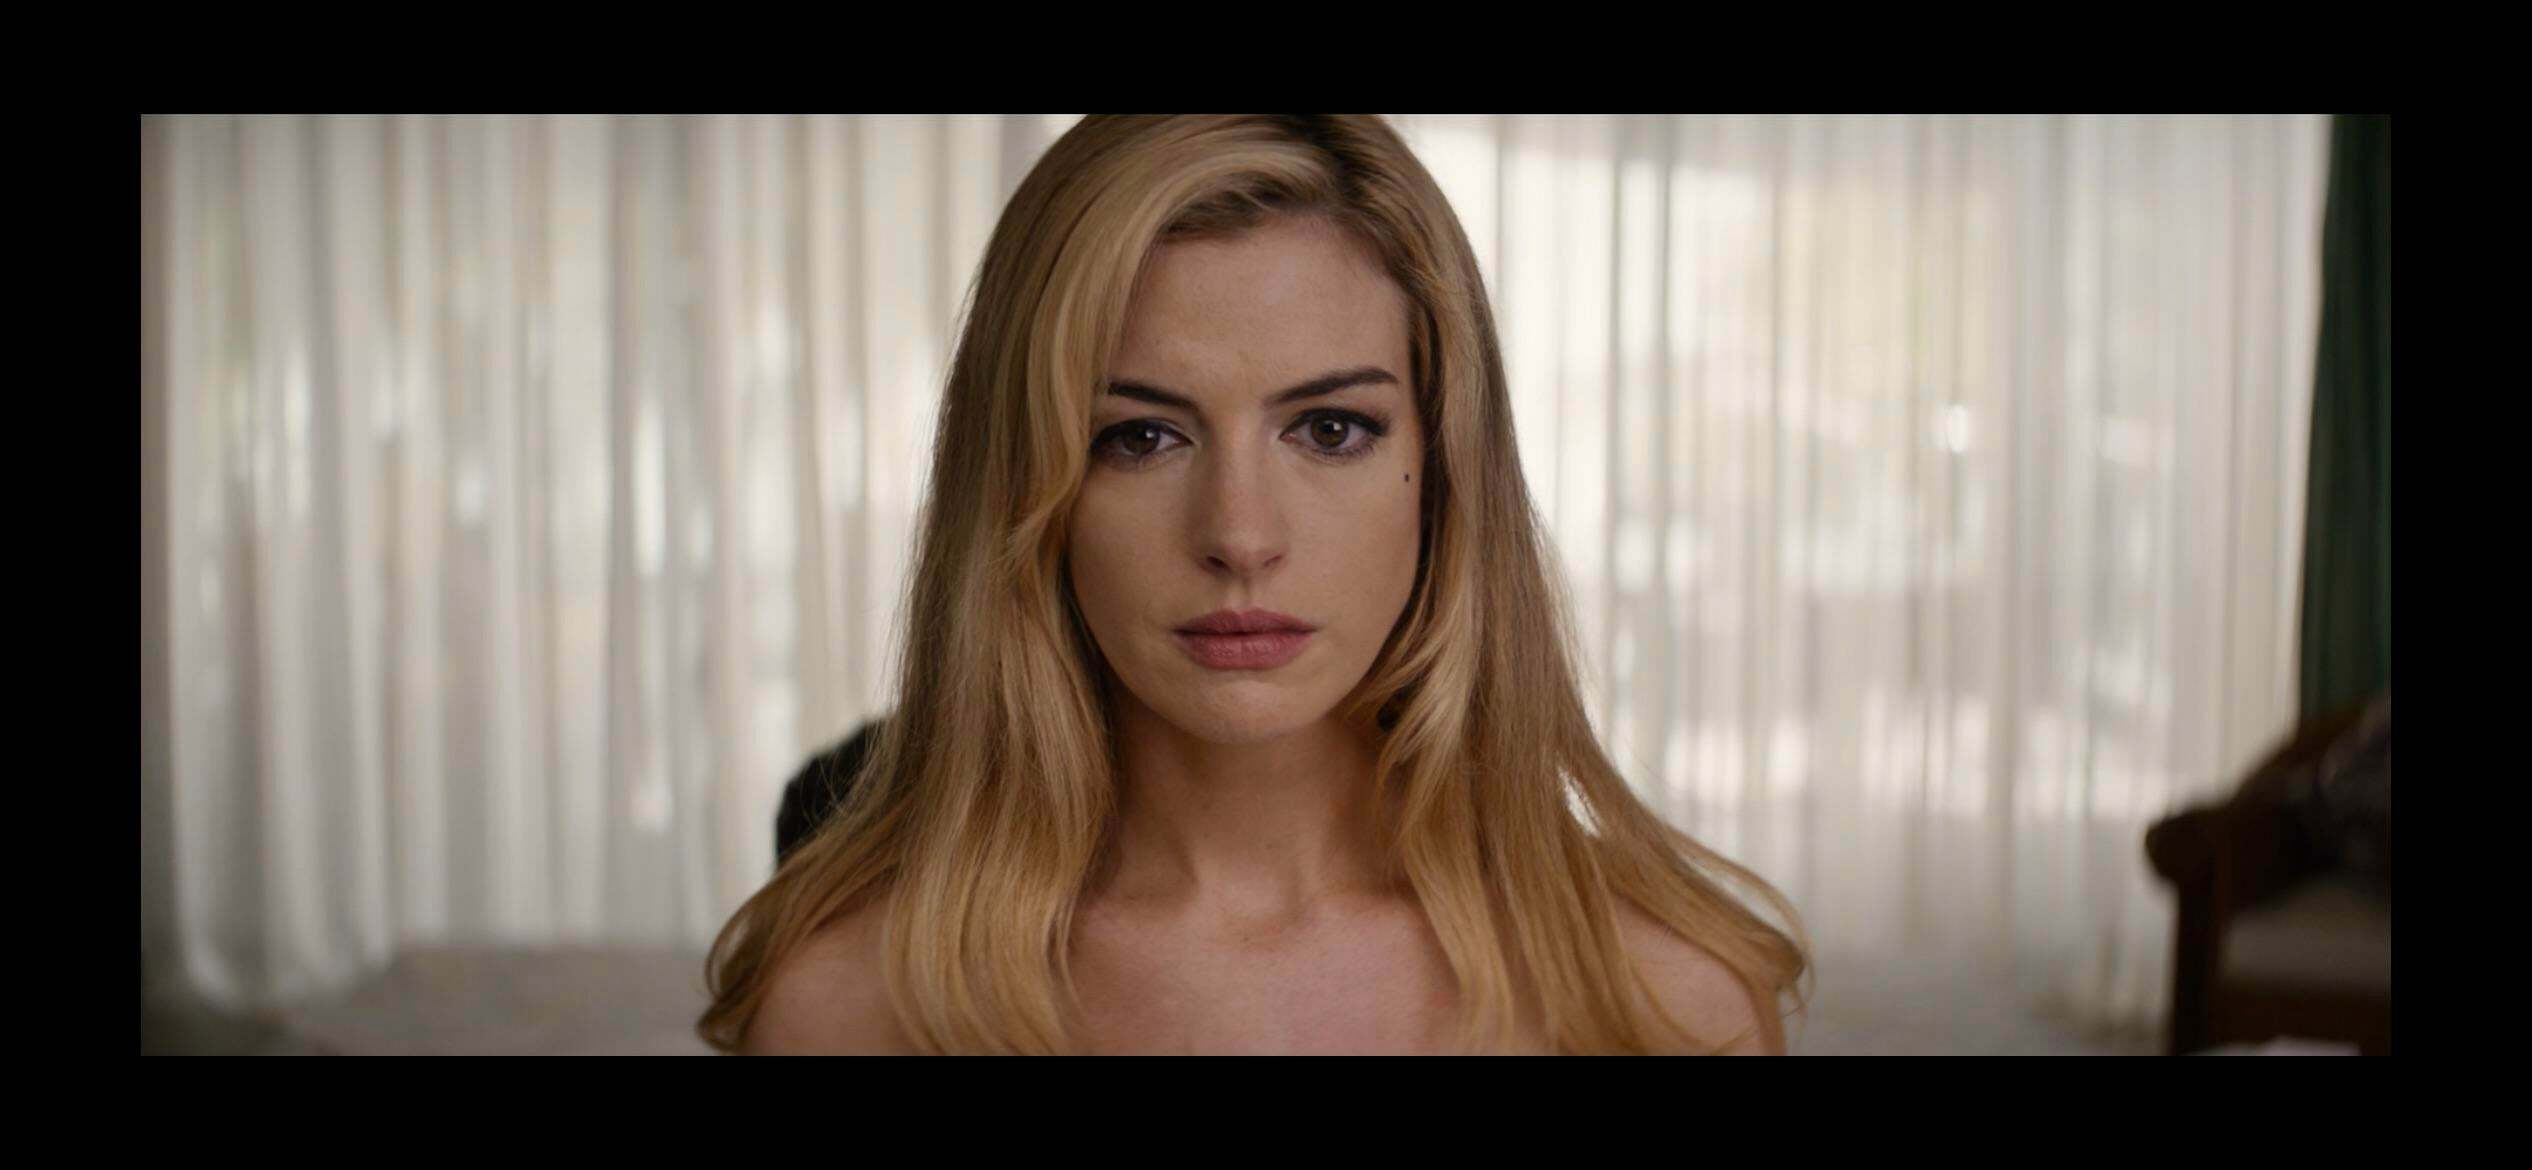 Anne Hathaway looks so fucking hot as a blonde Wish